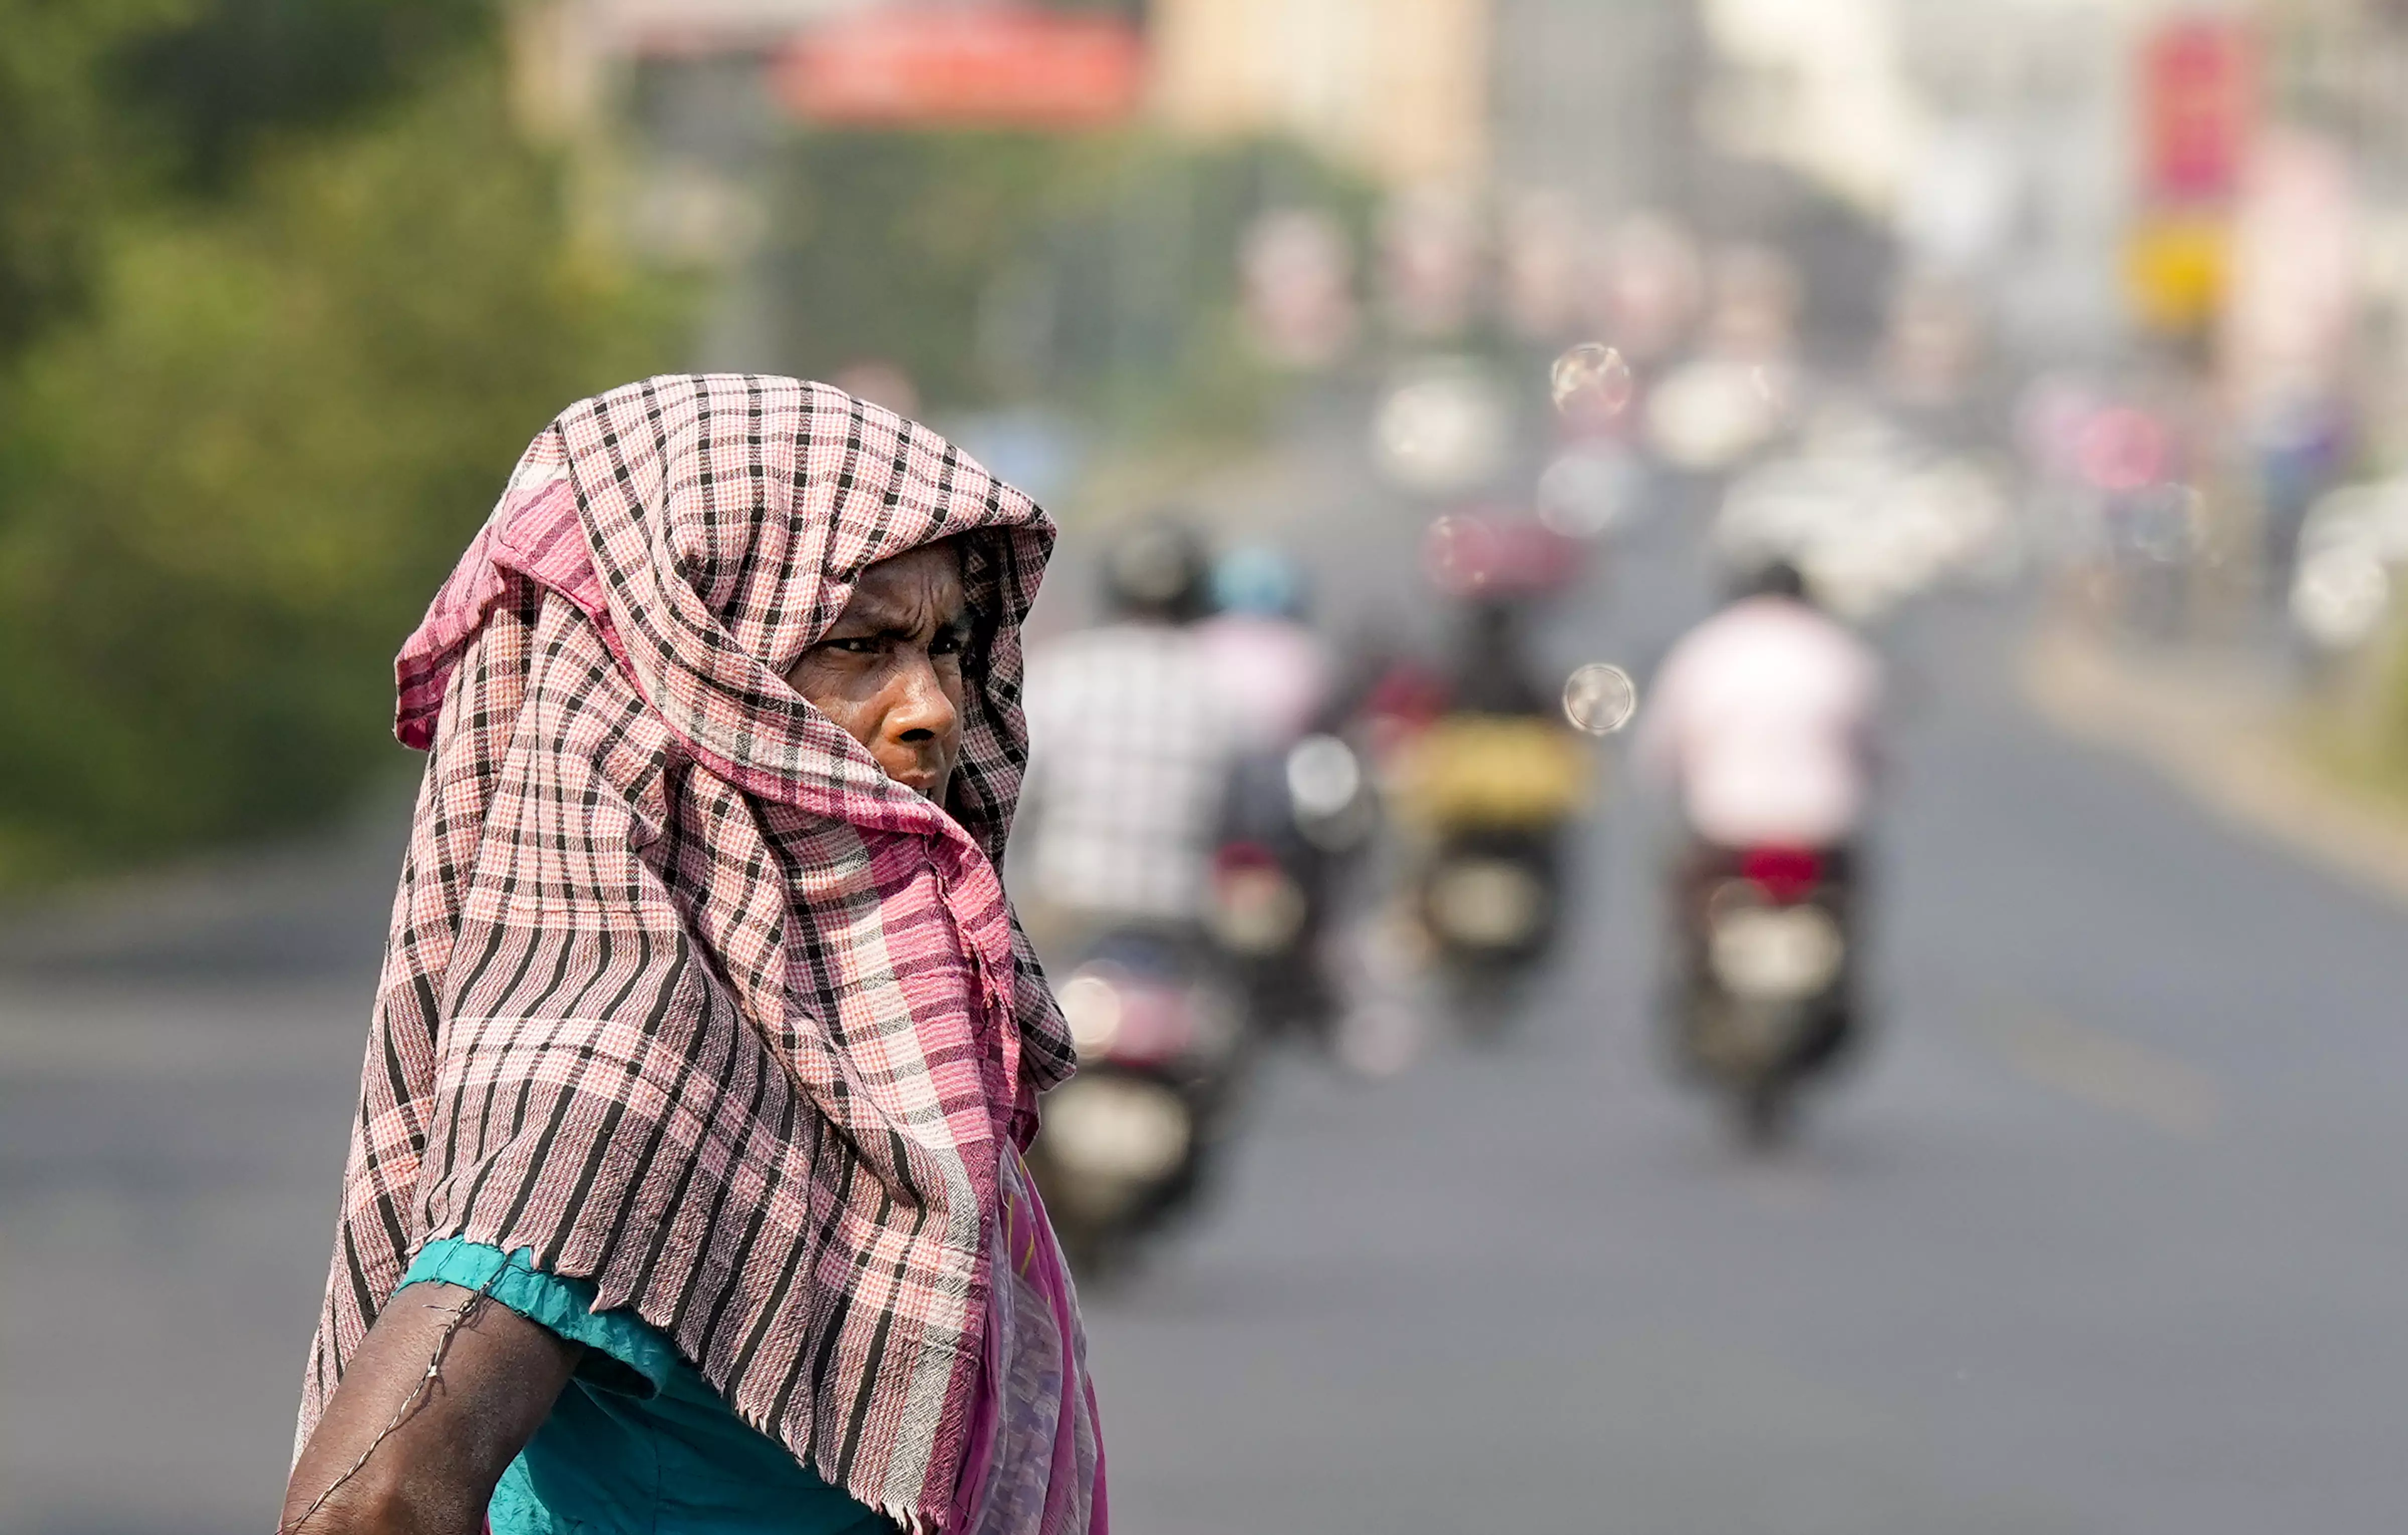 IMD predicts heatwave conditions in several states during first week of May